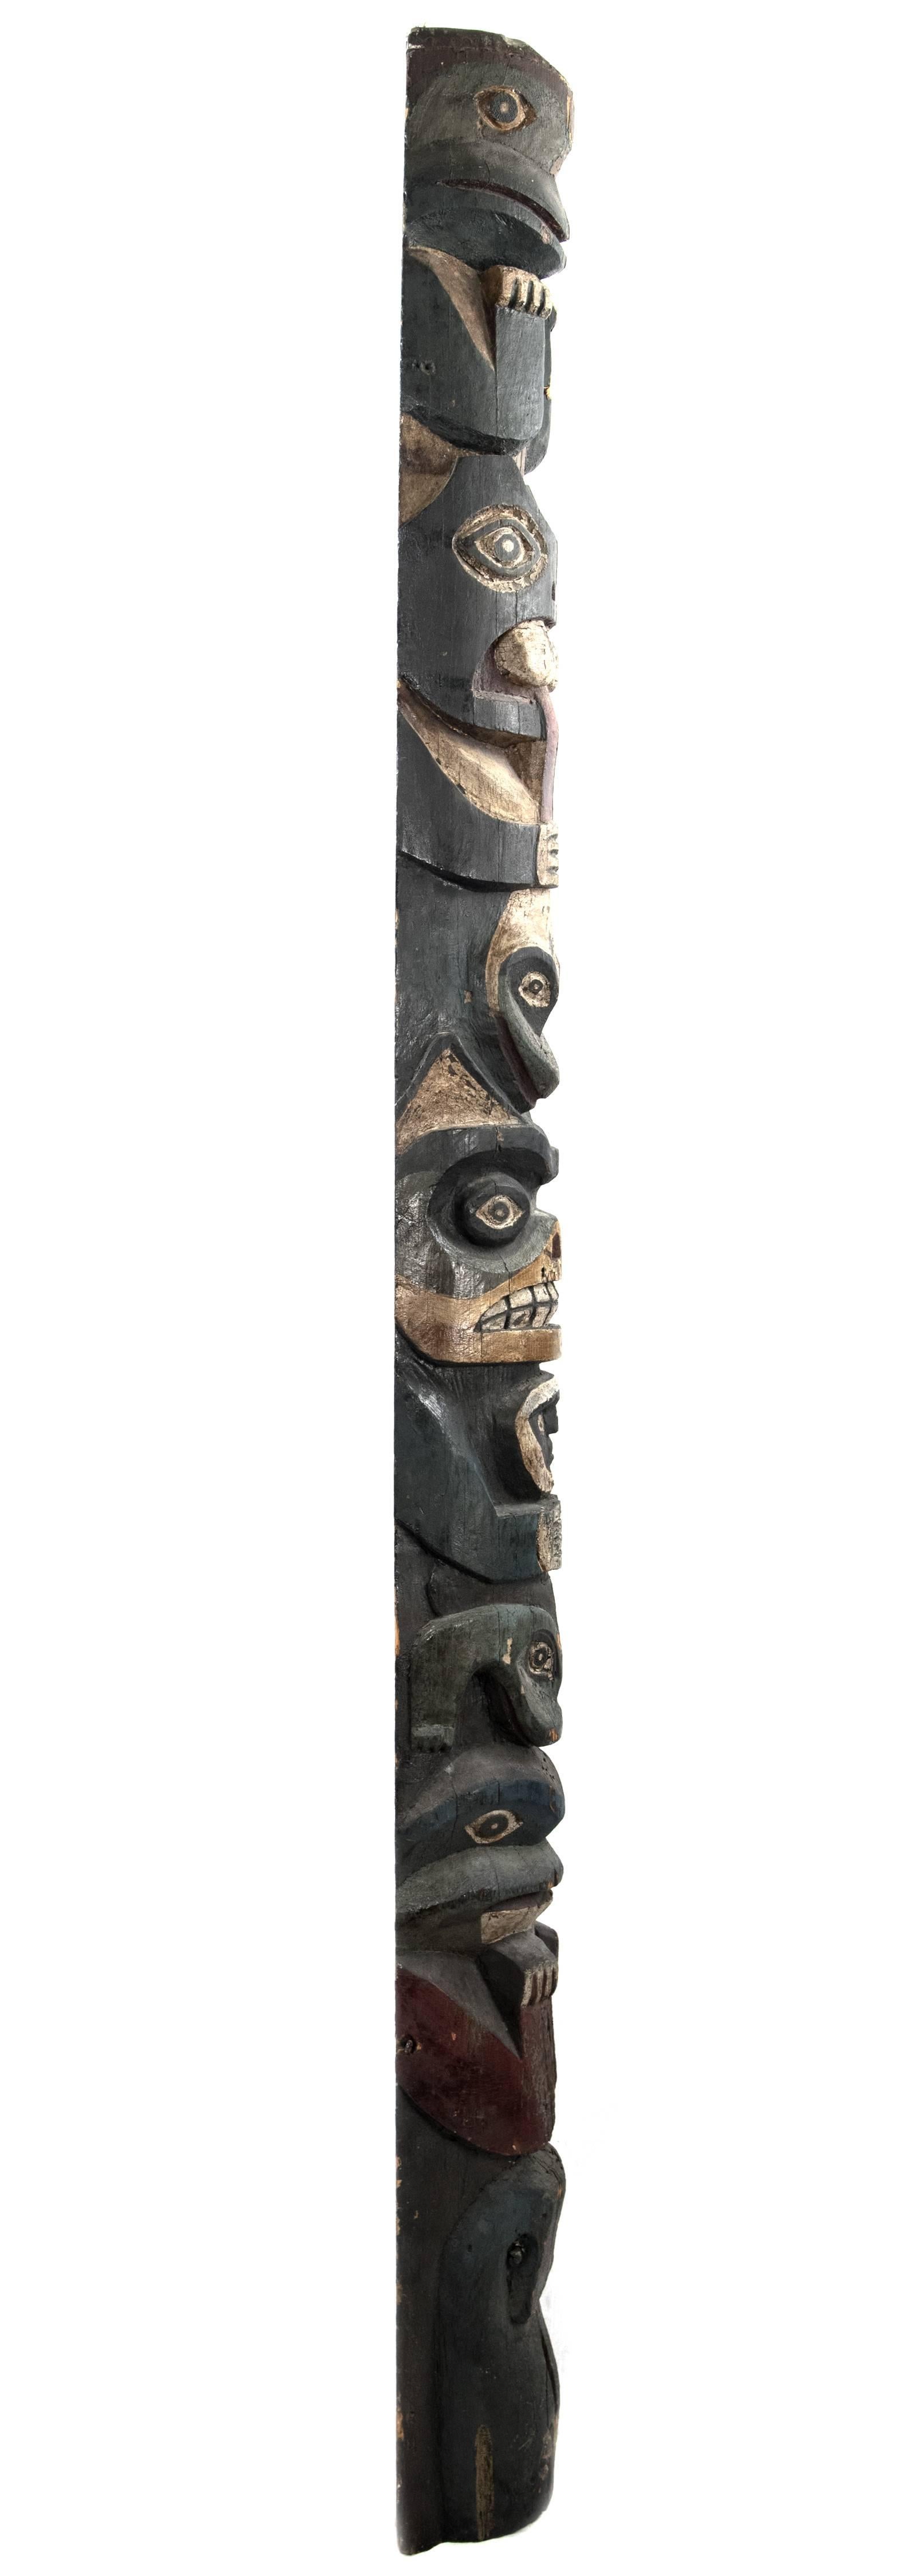 A 19th century native American TOTEM pole hand-carved from a single piece of wood with a polychrome painted surface, modeled on various animal and human figures perched on one another. Measures: 84 ½ x 9 ¼ x 6 in.